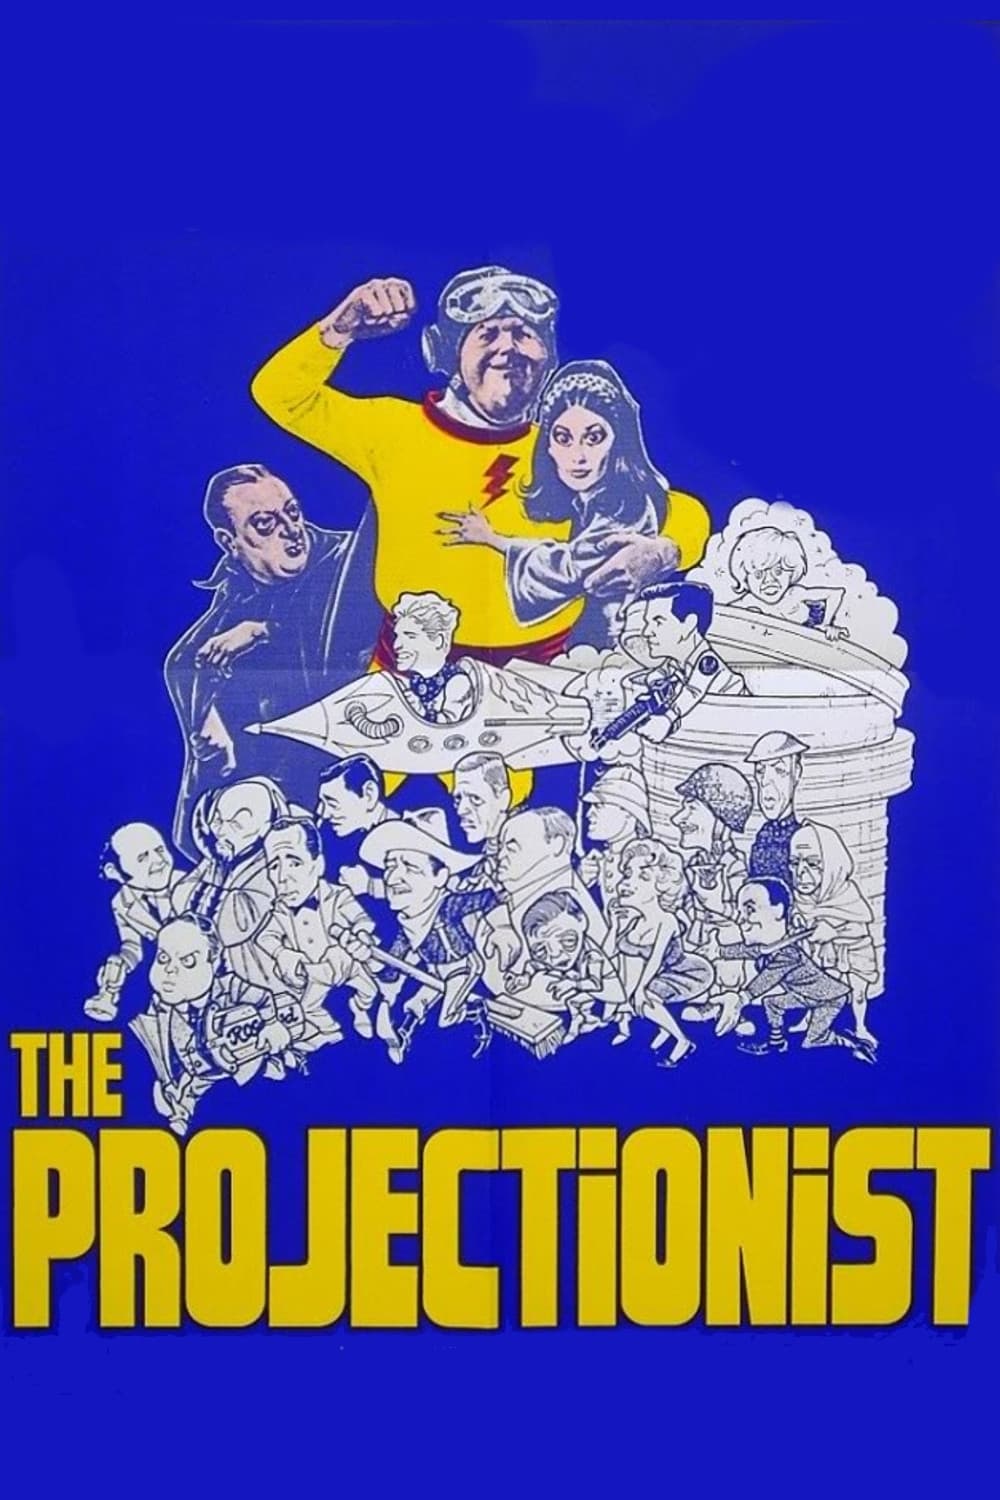 The Projectionist (1971)